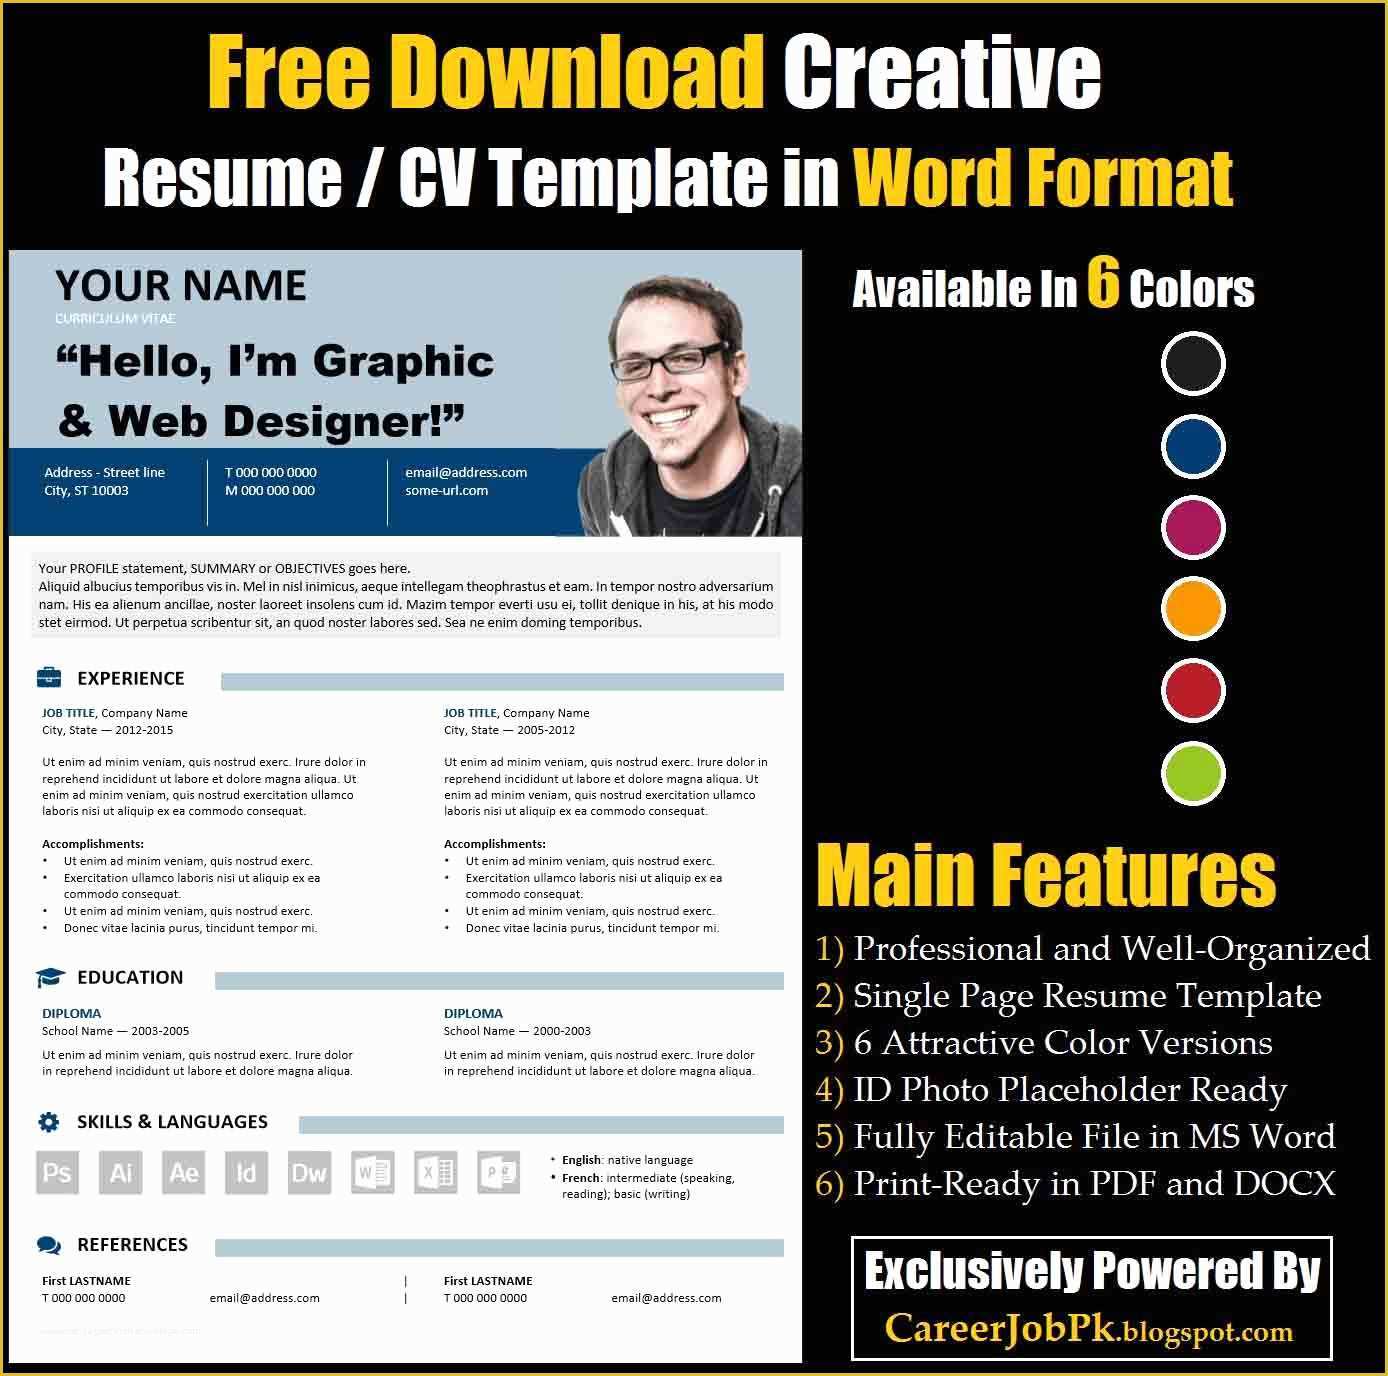 Awesome Resume Templates Free Of Free Download Editable Resume Cv Template In Ms Word format